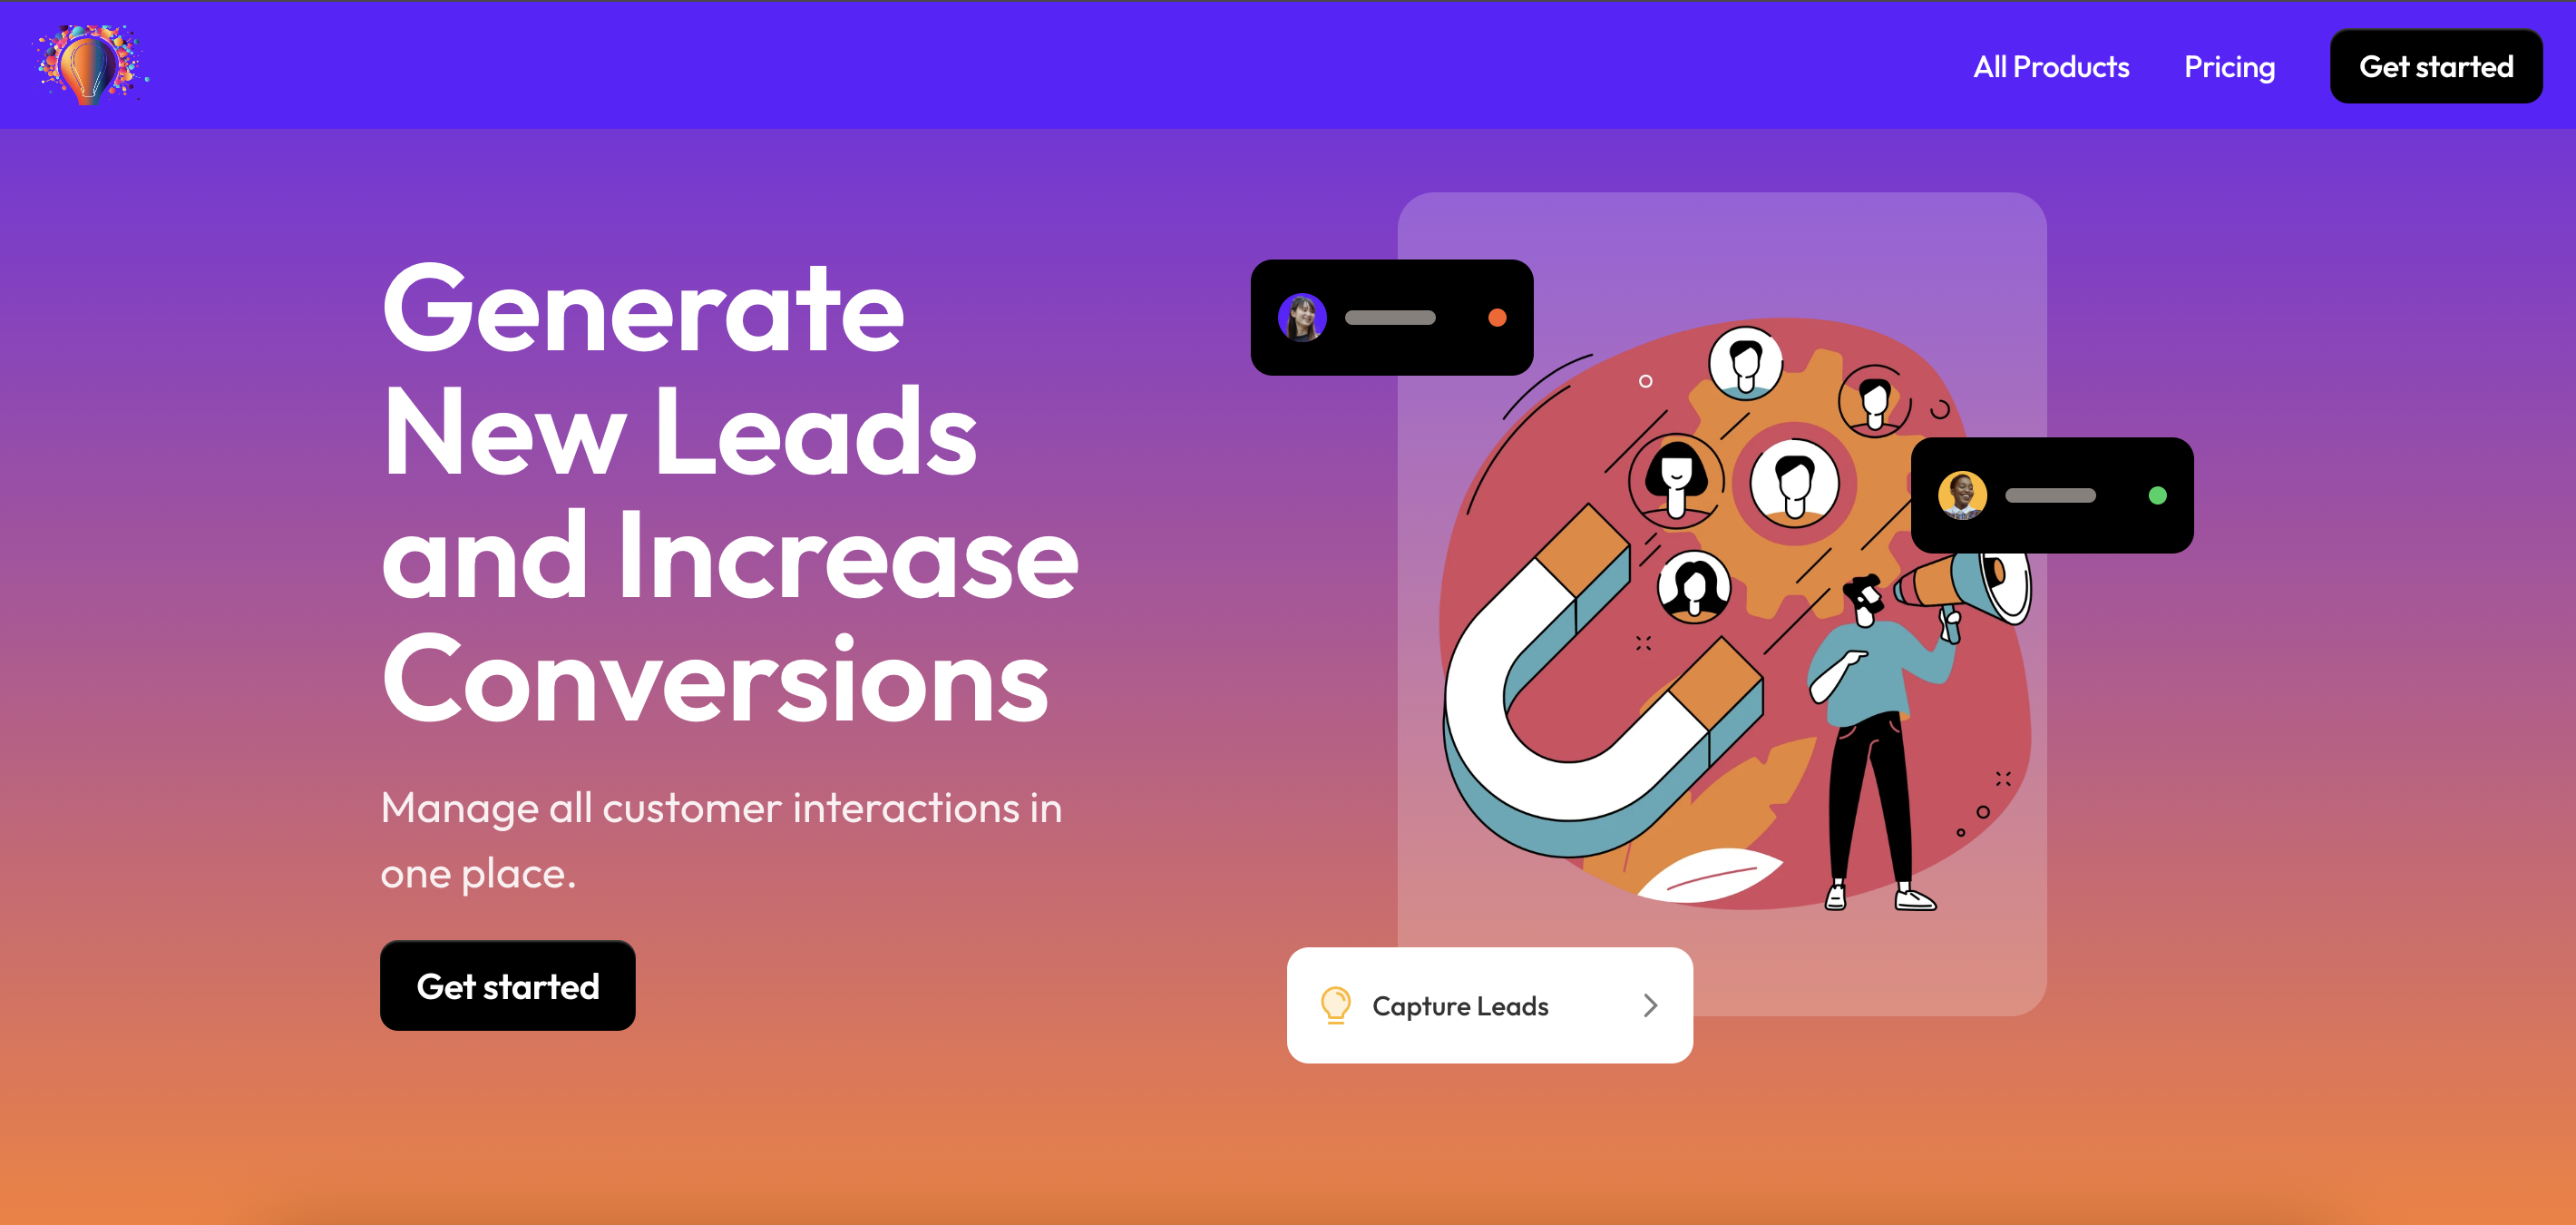 TransformLeads.com Software - Transormleads Marketing suite. Generate new leads and increase conversions